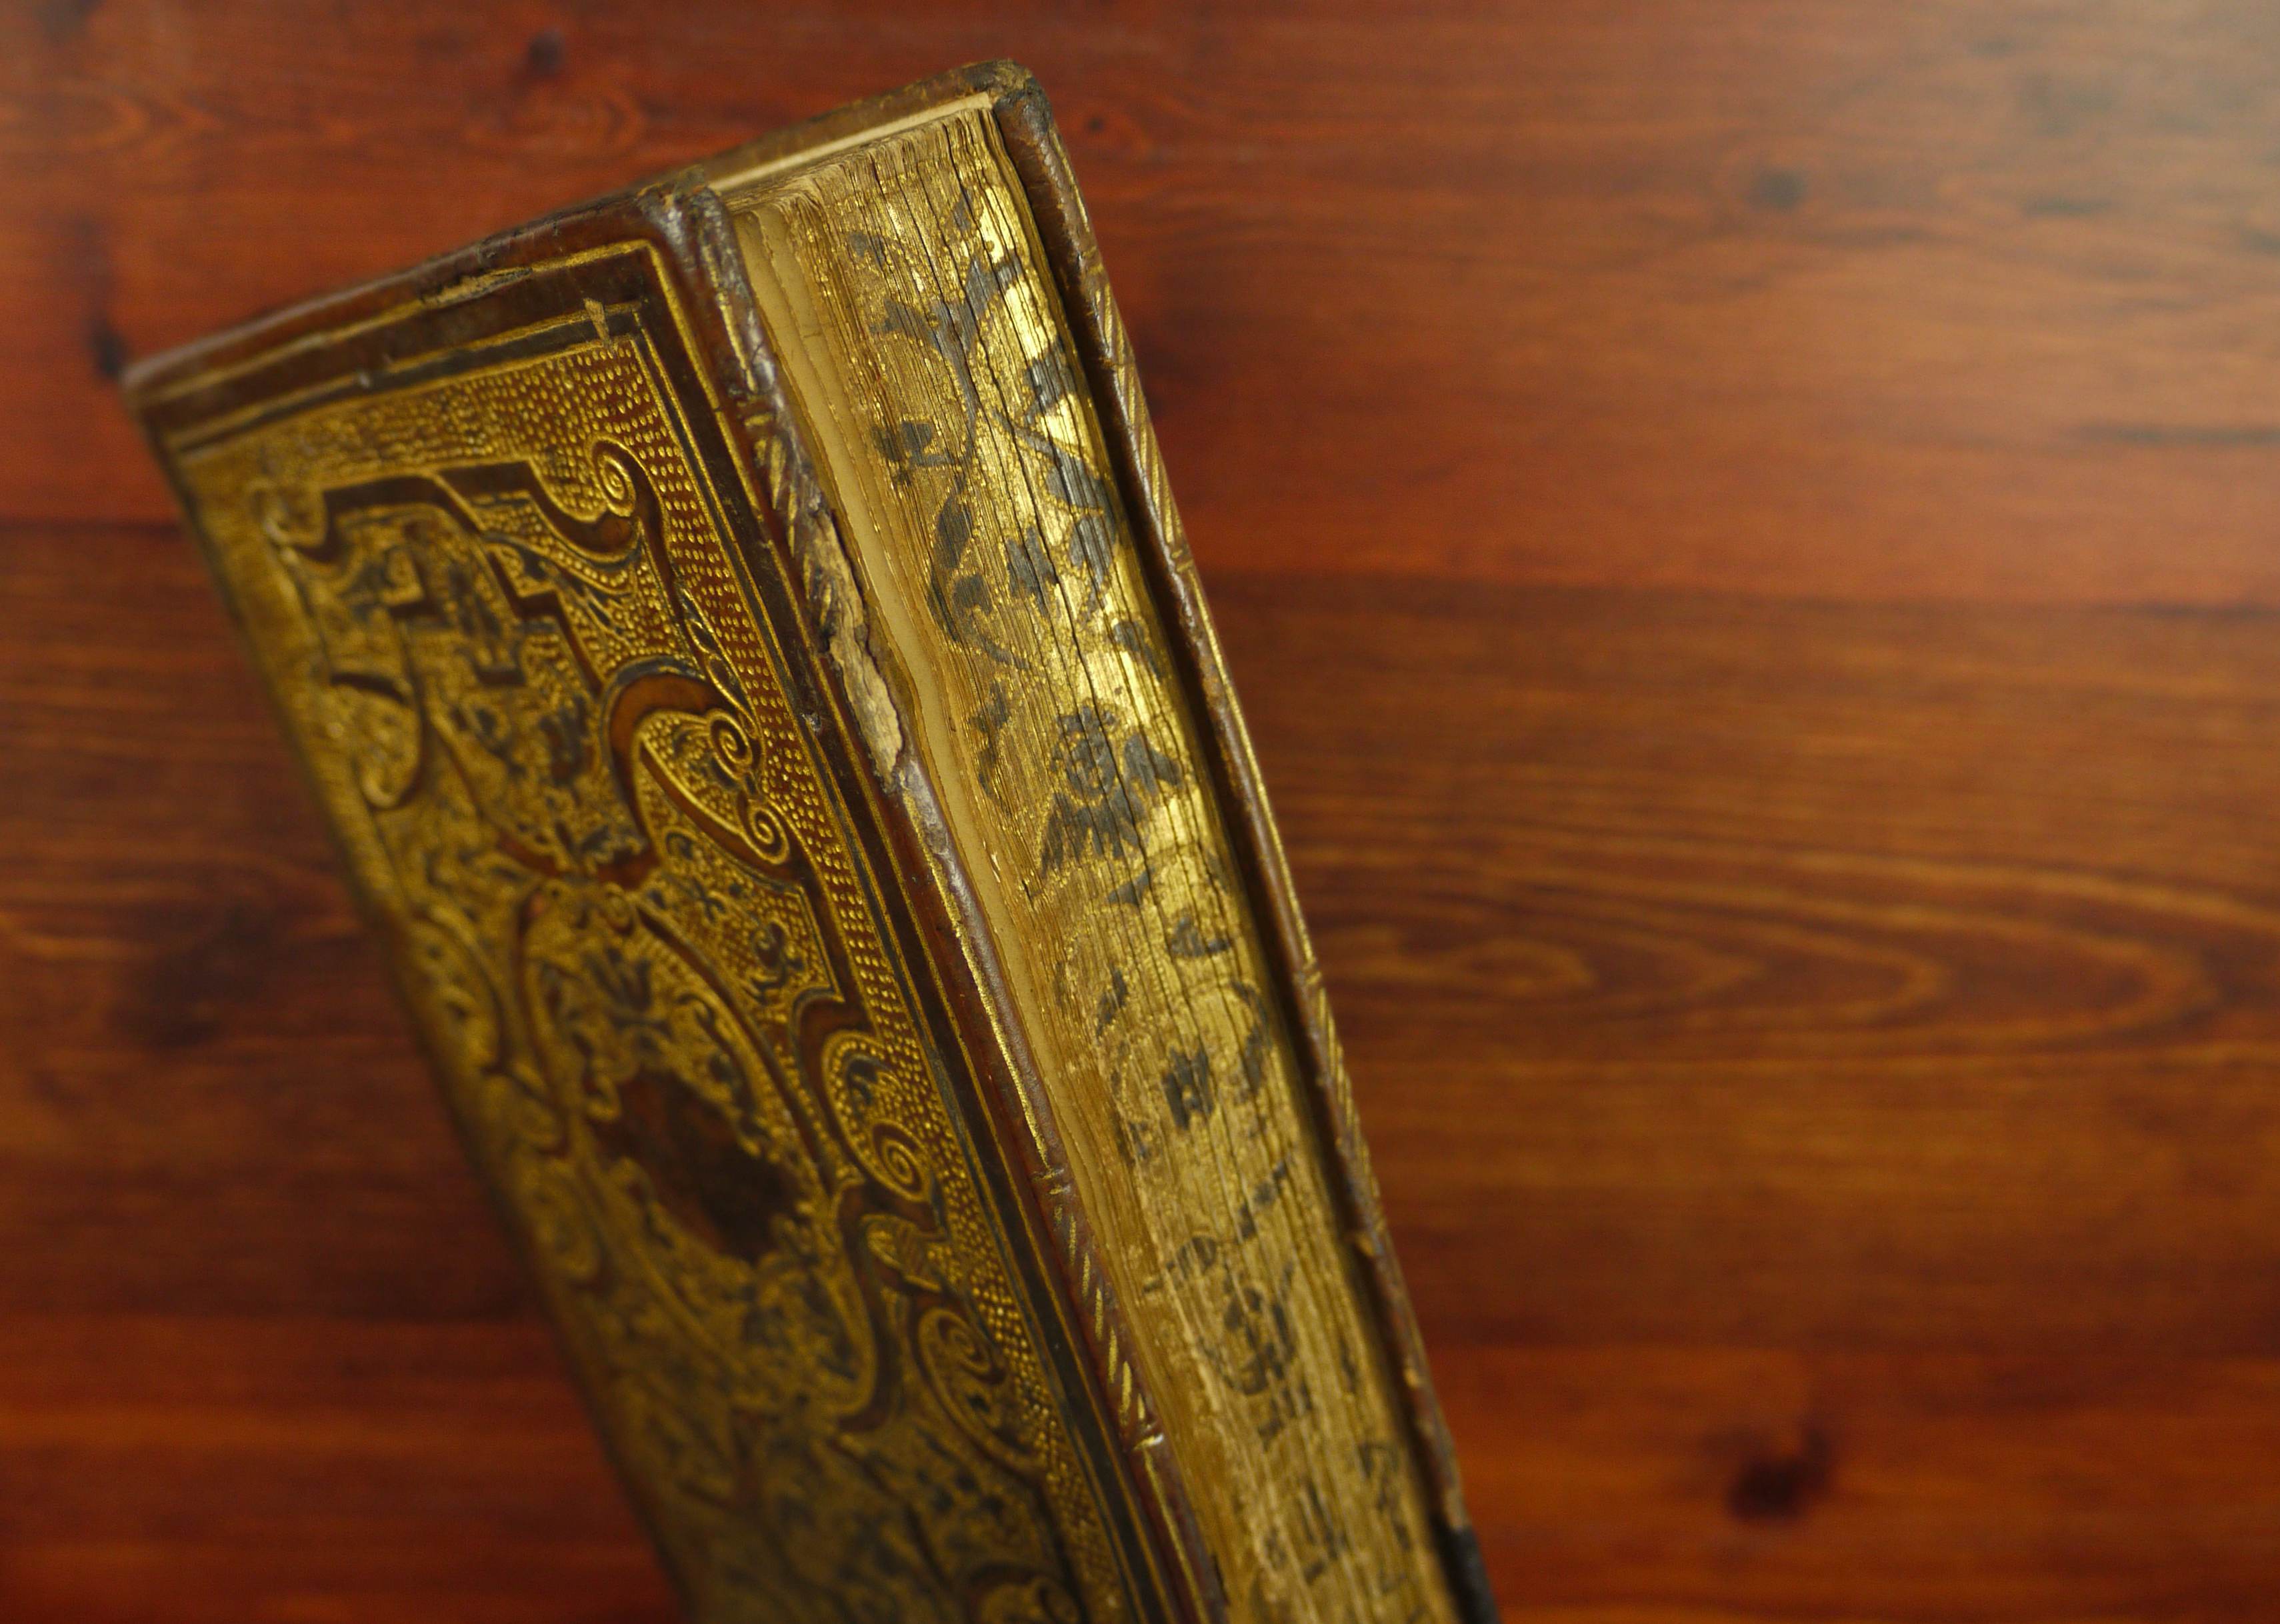 A side view of a very ornate book decorated with gold.